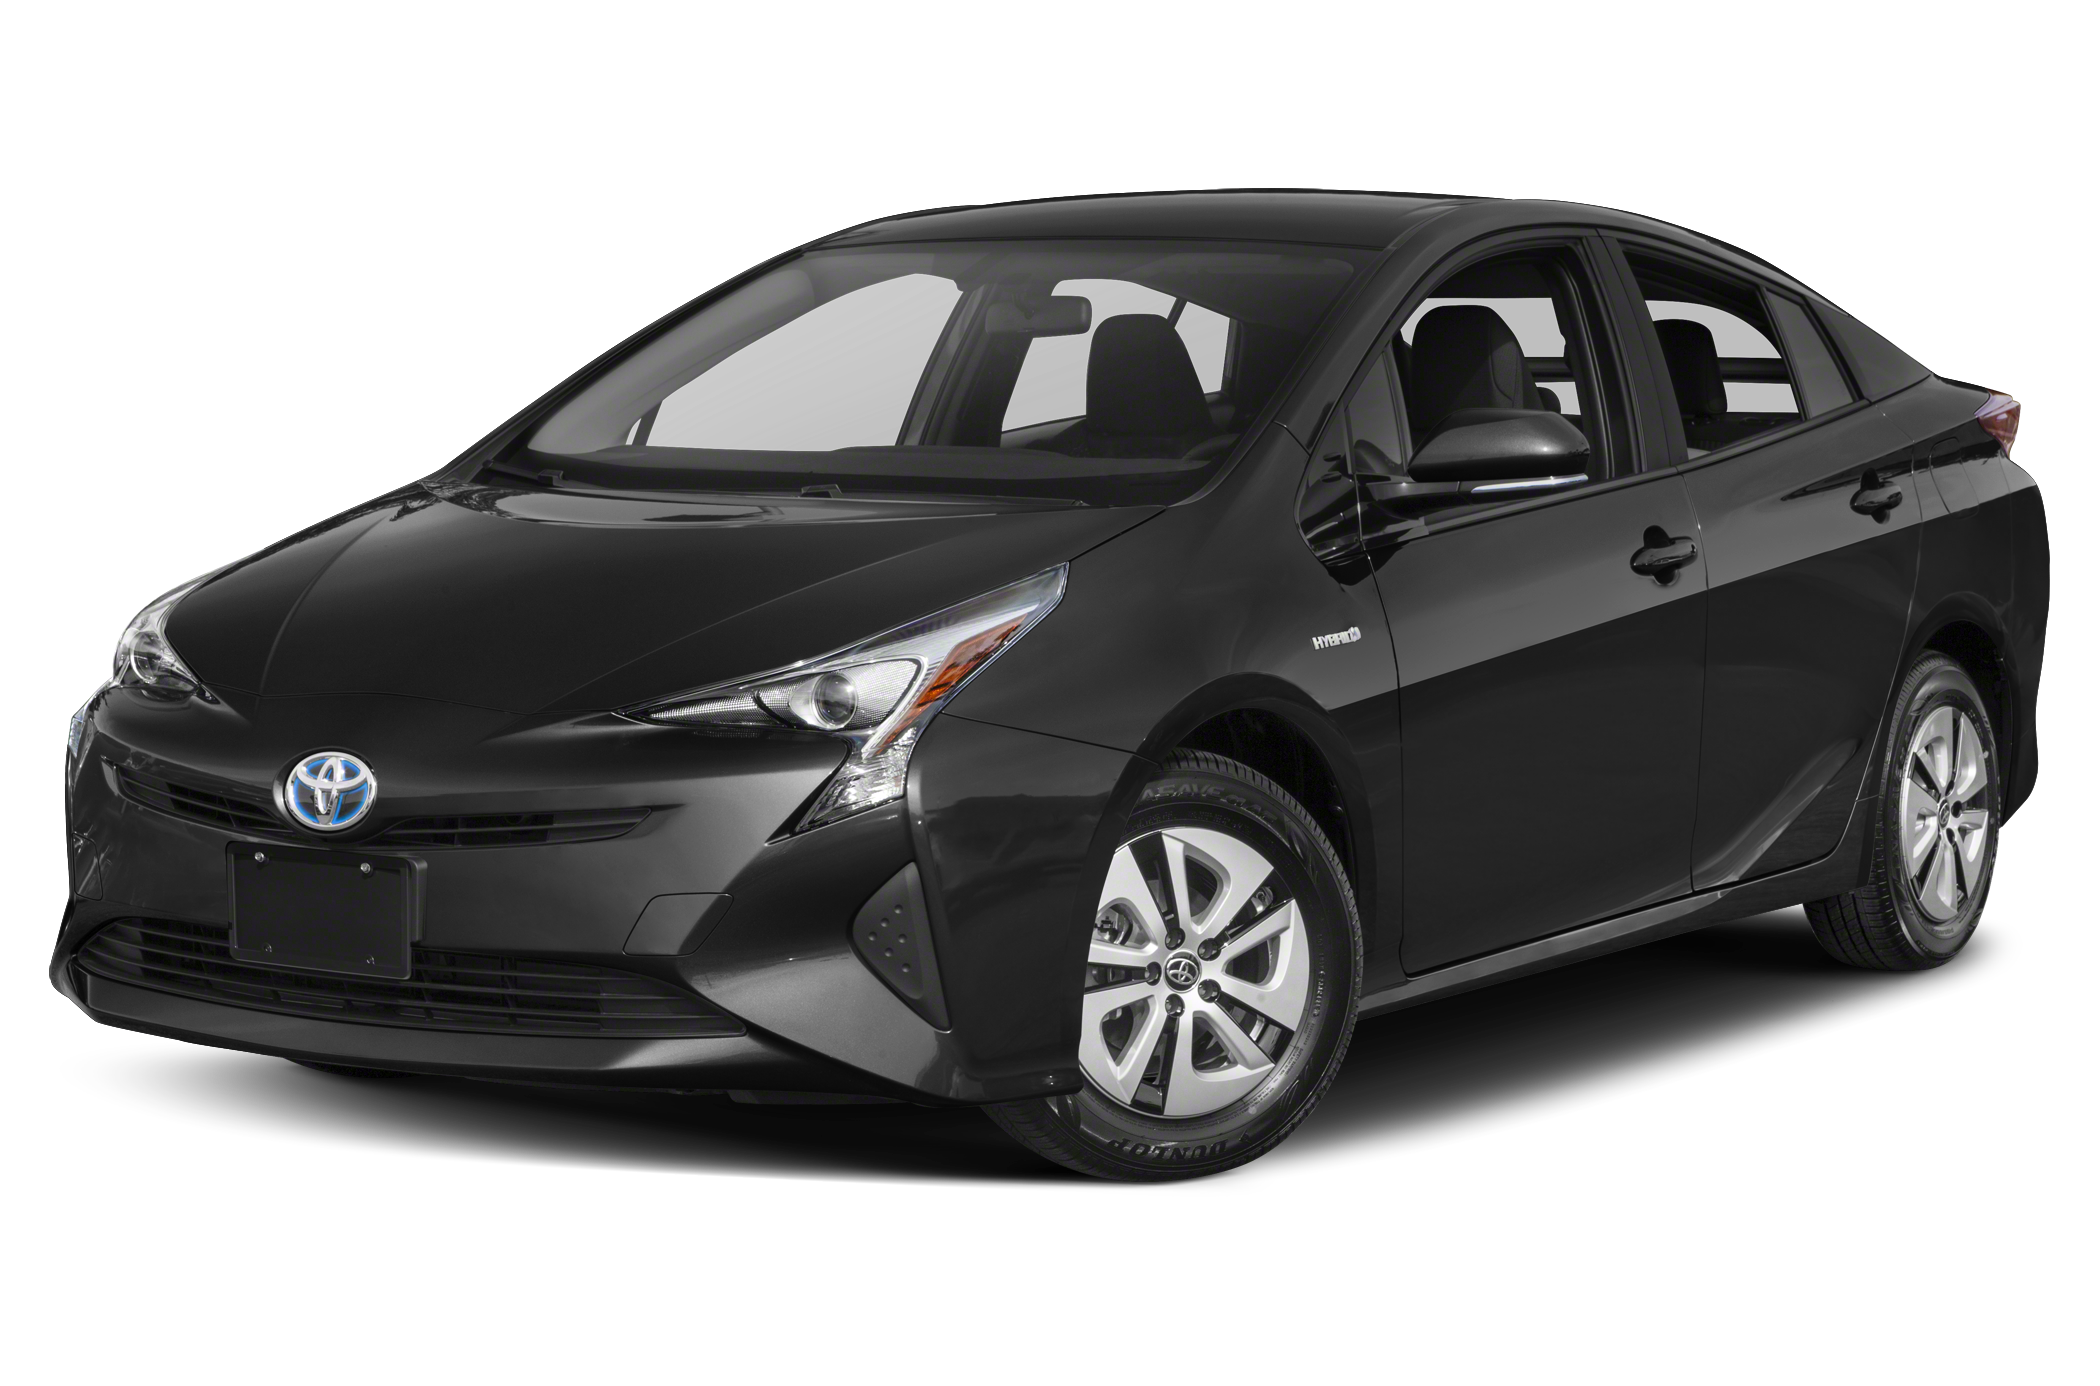 Used 2016 Toyota Prius for Sale in Cheshire Village CT Cars com